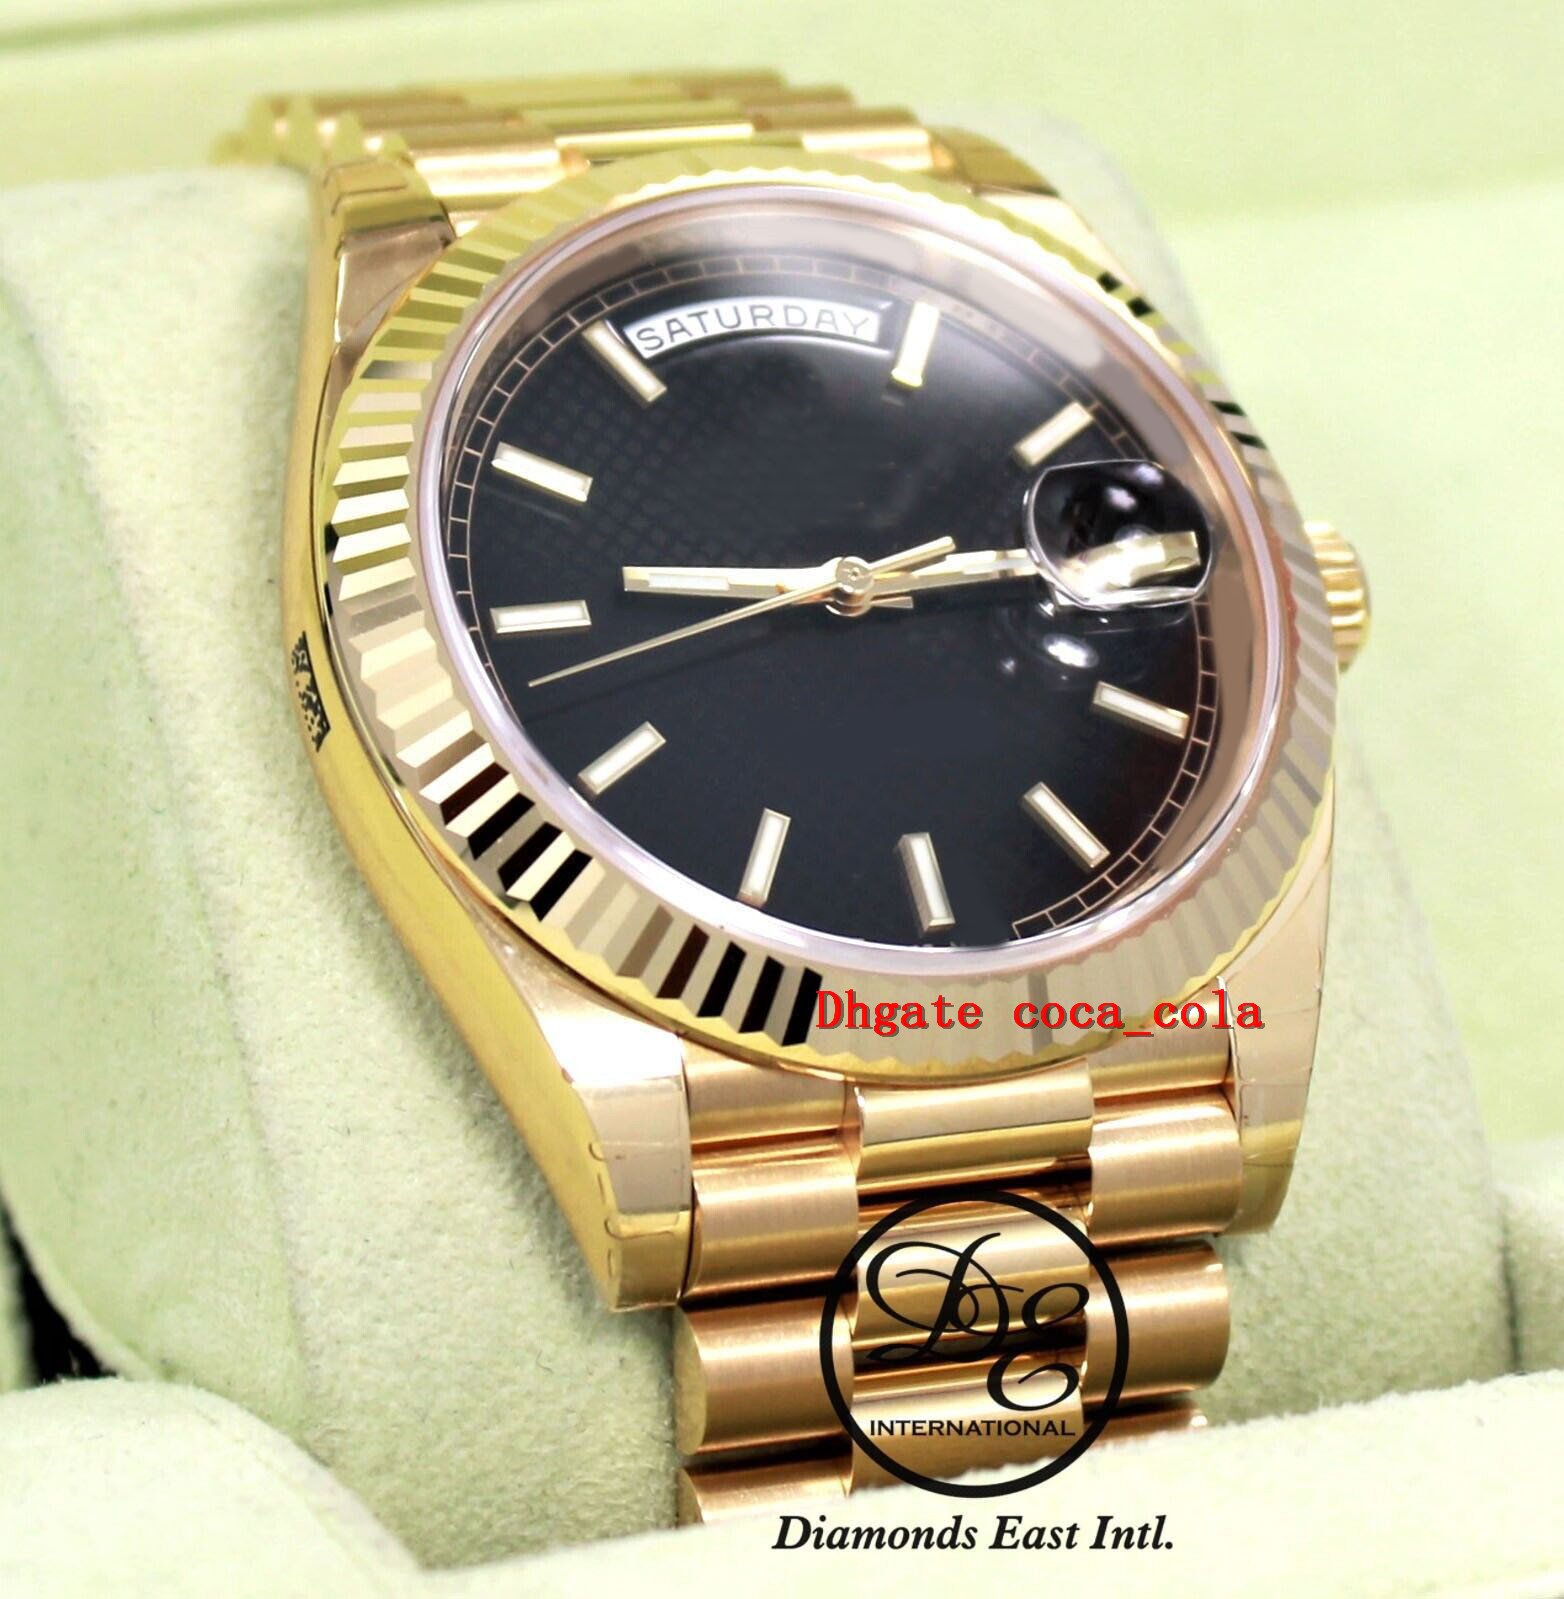 New Factory Version Counter quality watch 18K Yellow Gold Black Motif Dial Cal 3255 Movement Automatic ETA Diving Swimming Mens W266w